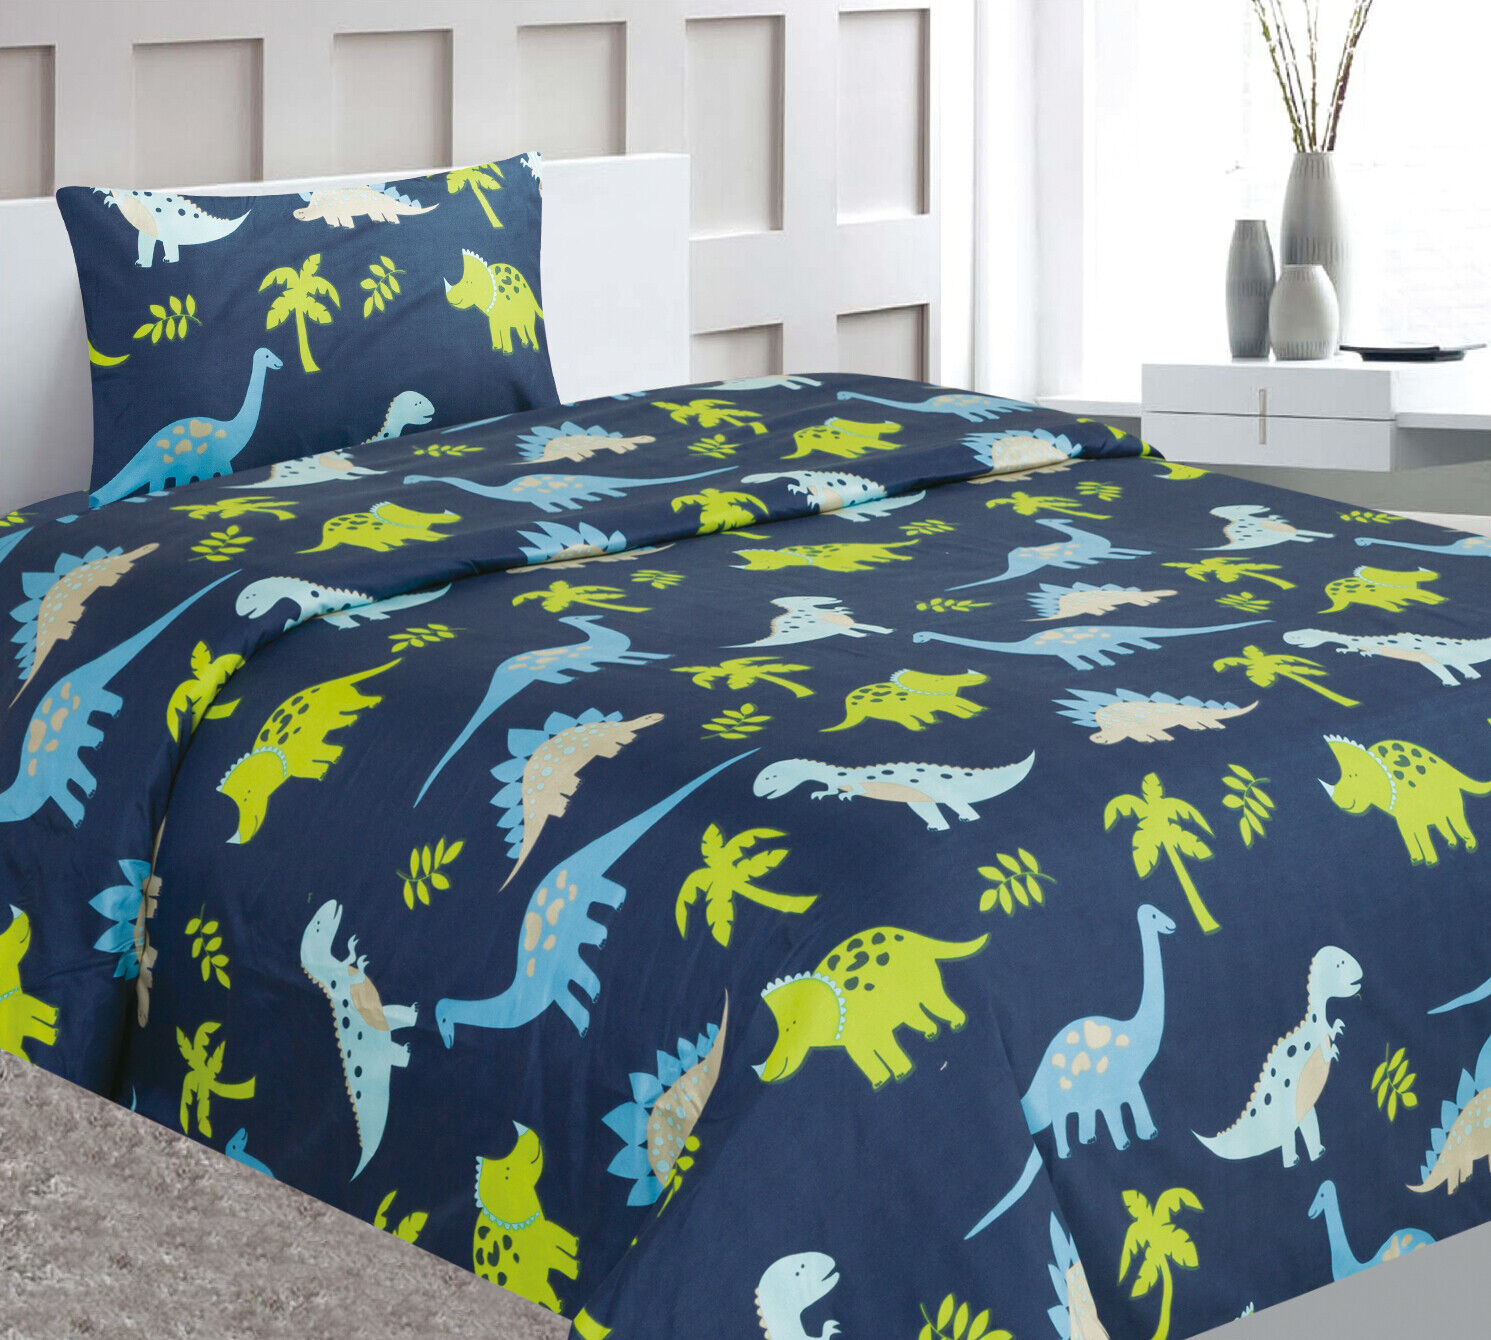 Dino-themed Twin Sheet Set - 3 Pieces